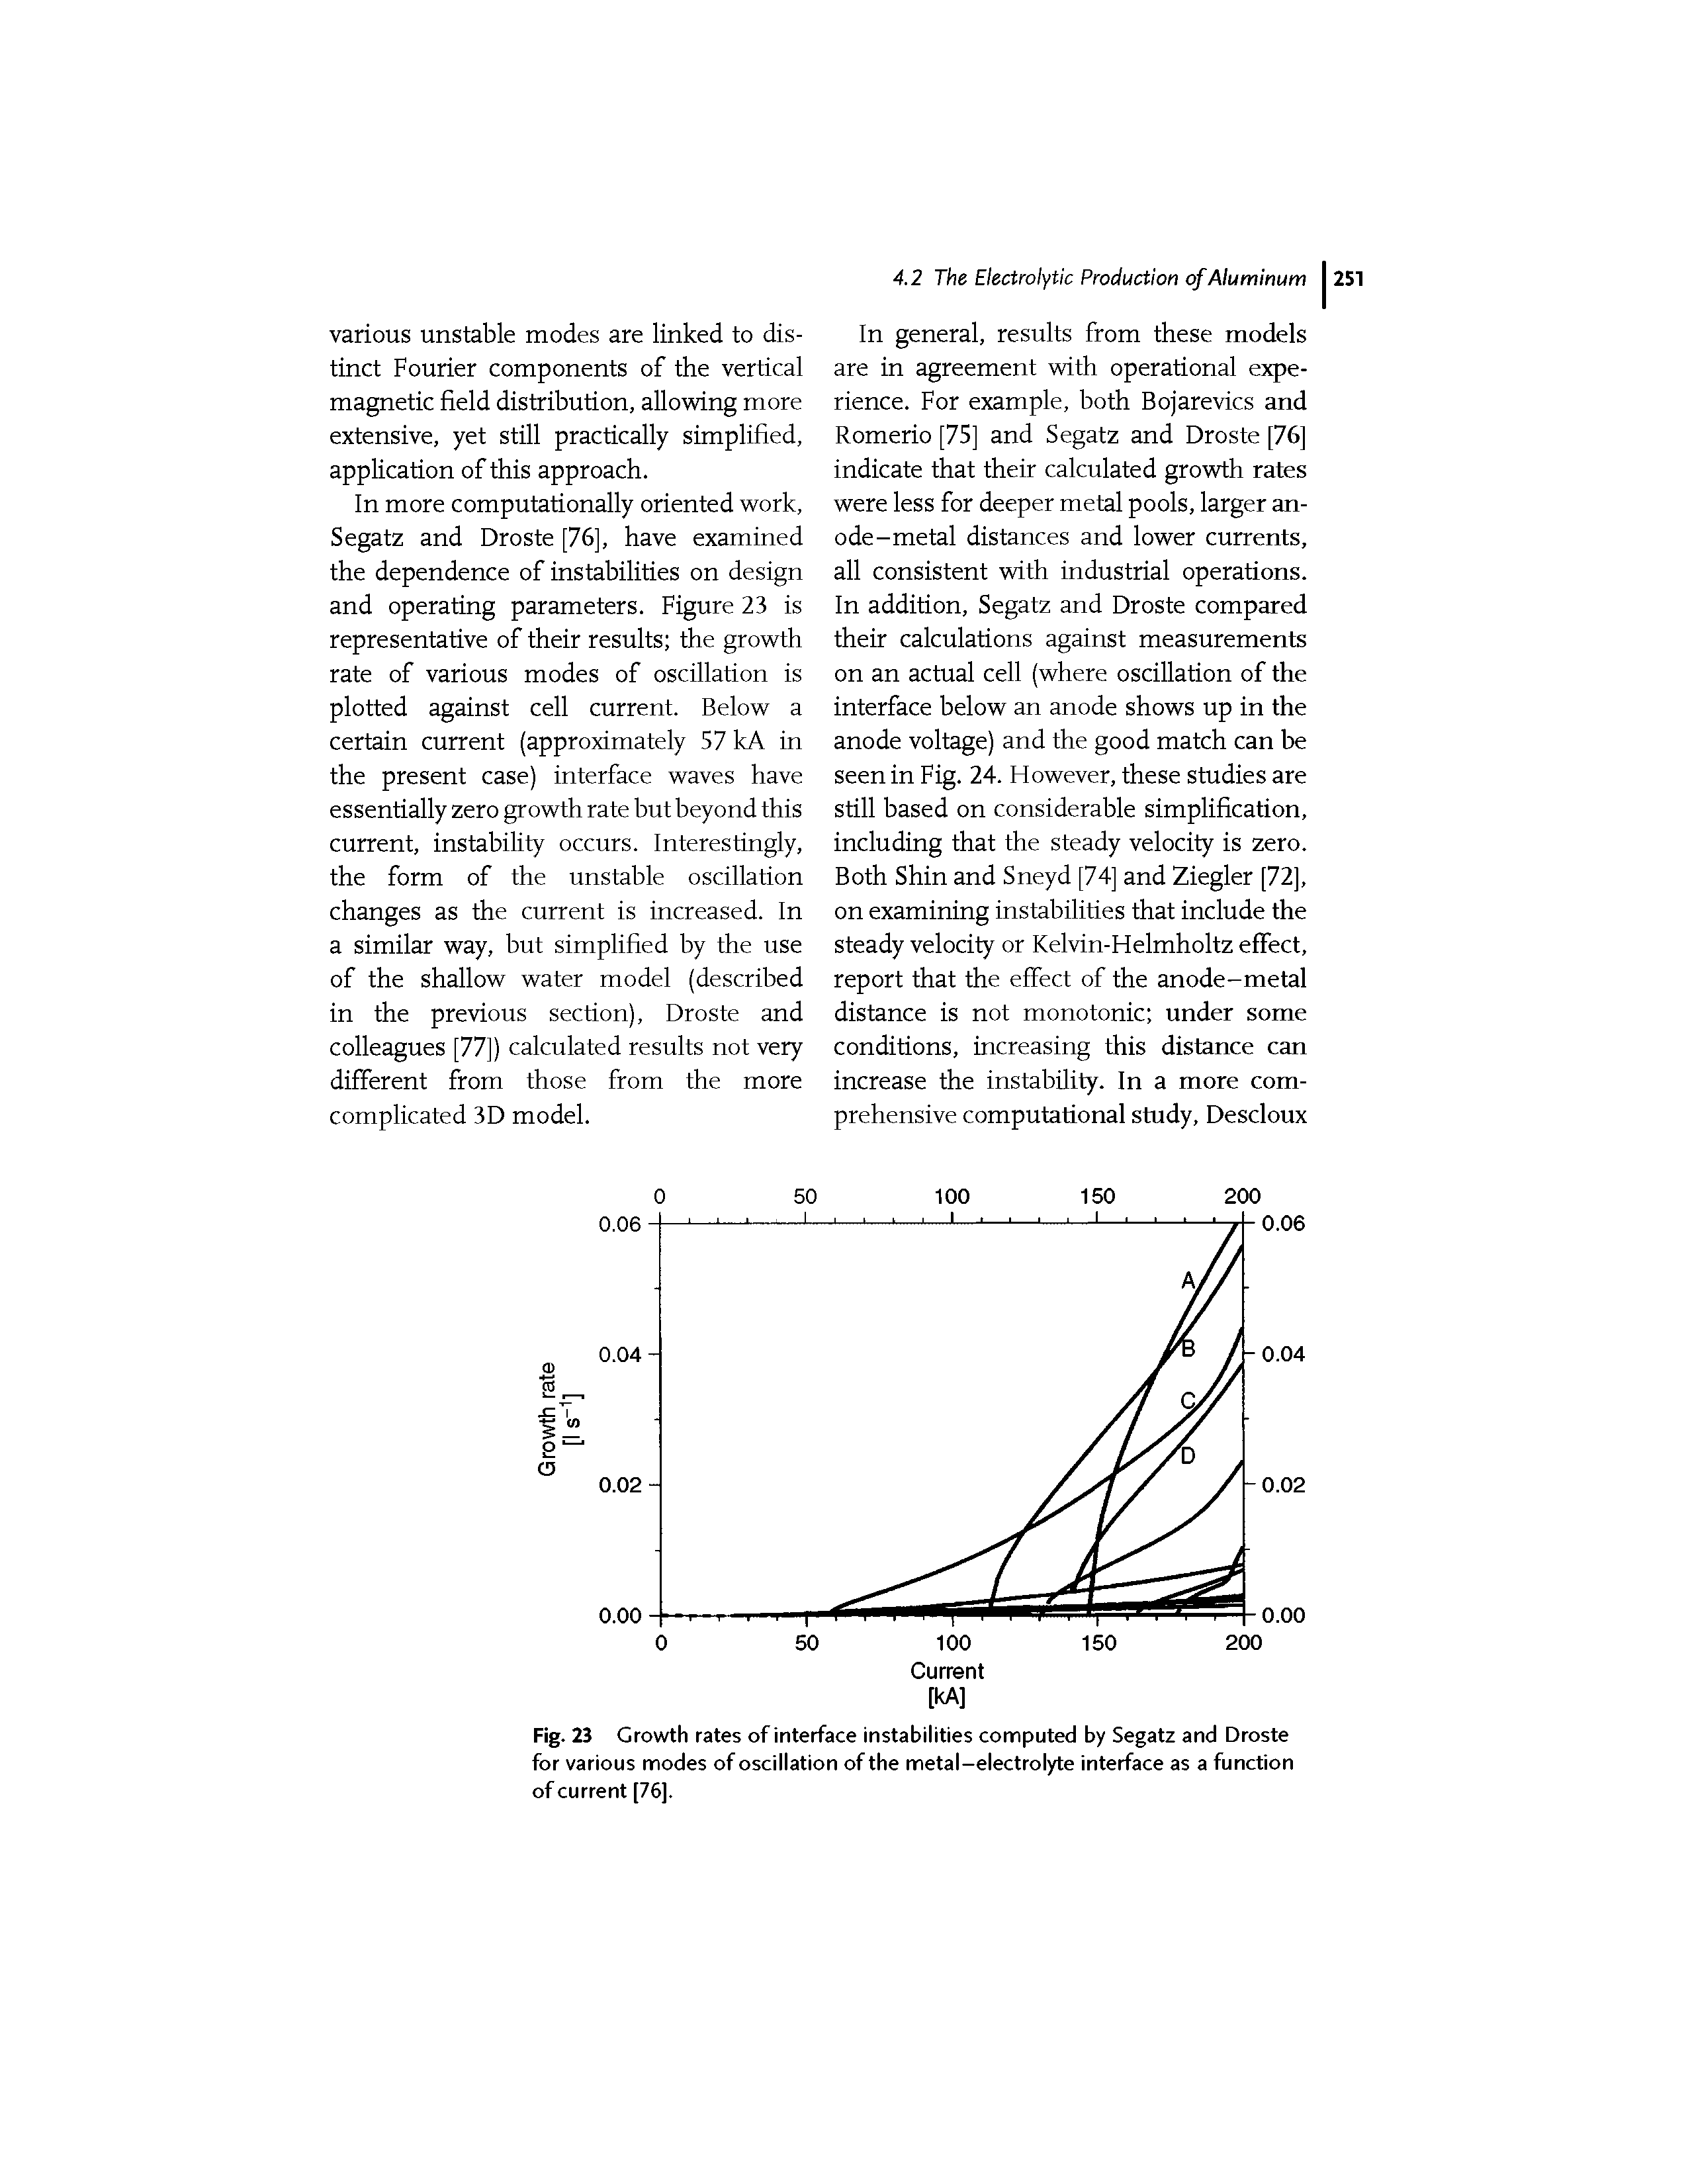 Fig. 23 Growth rates of interface instabilities computed by Segatz and Droste for various modes of oscillation of the metal-electrolyte interface as a function of current [76].